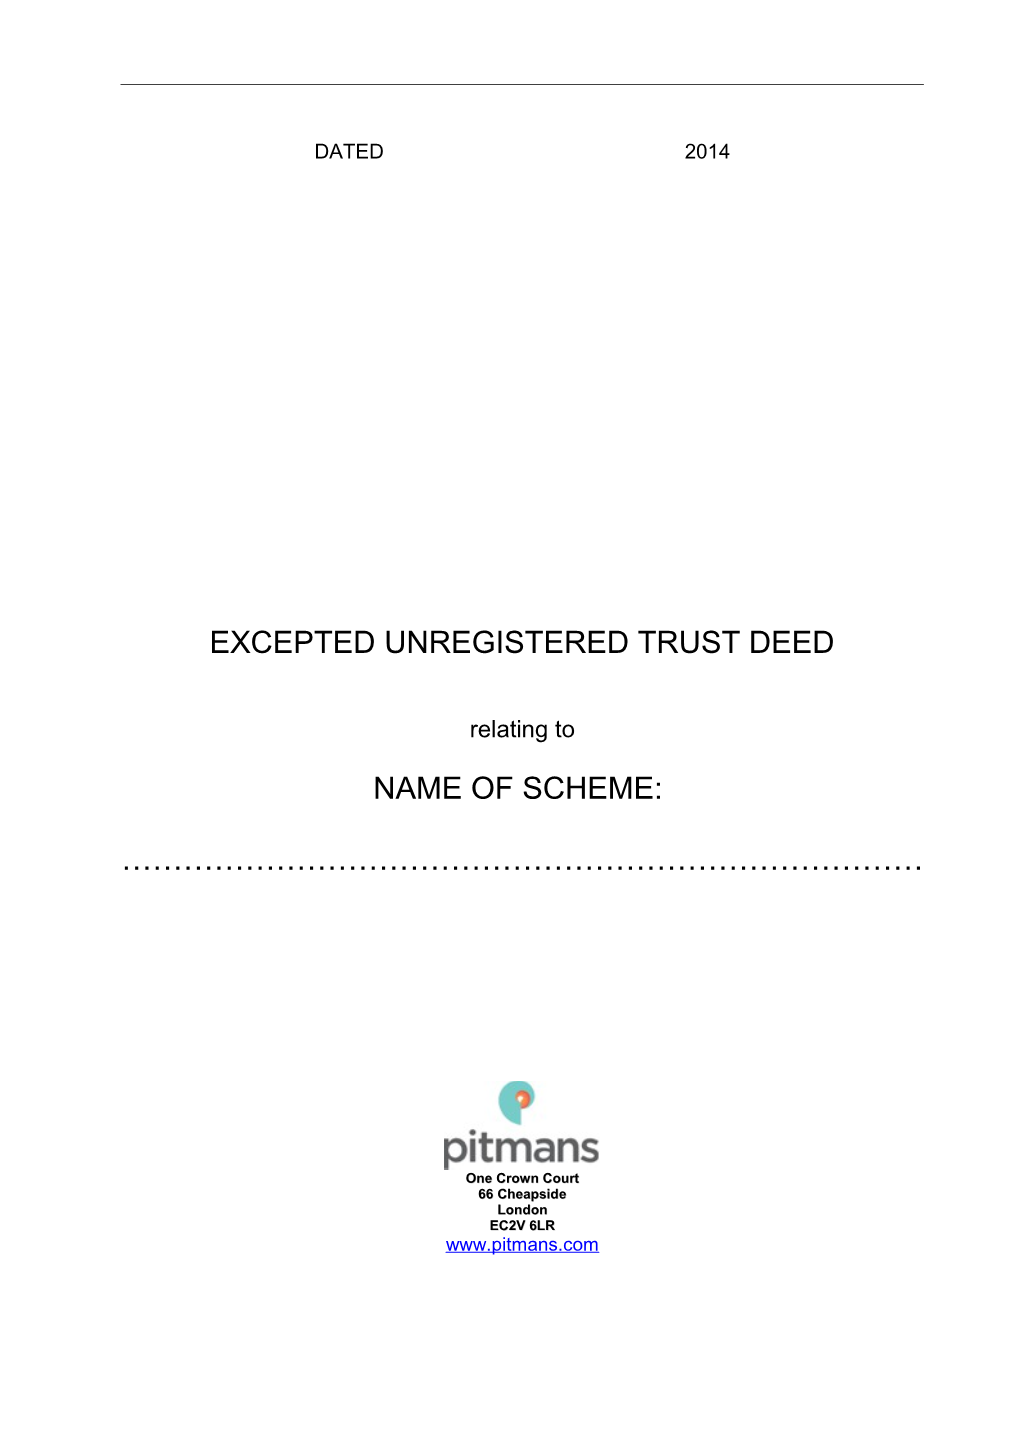 Excepted Unregistered Trust Deed